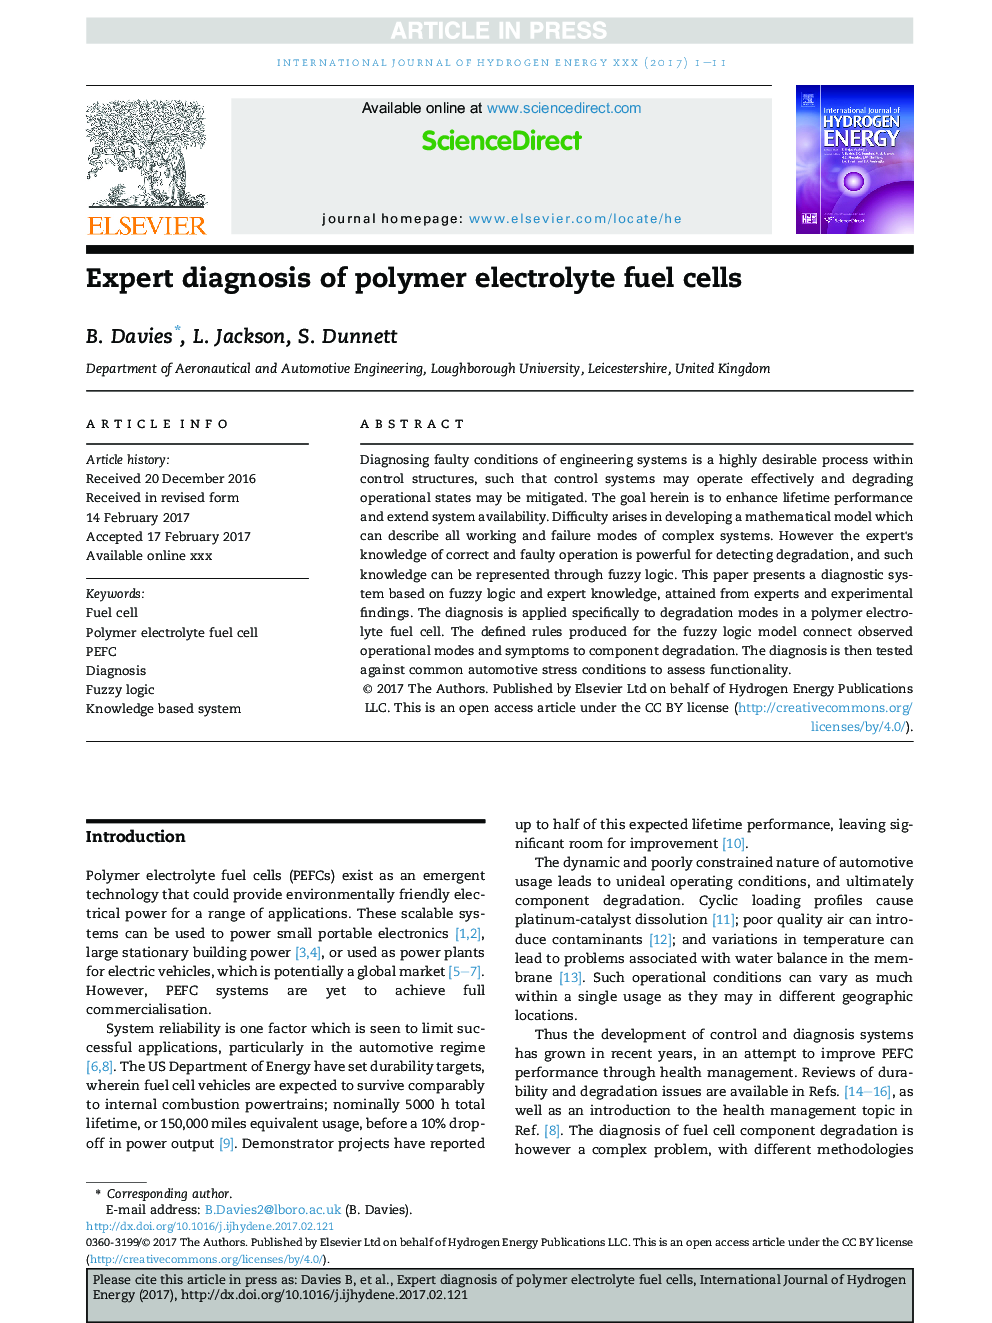 Expert diagnosis of polymer electrolyte fuel cells